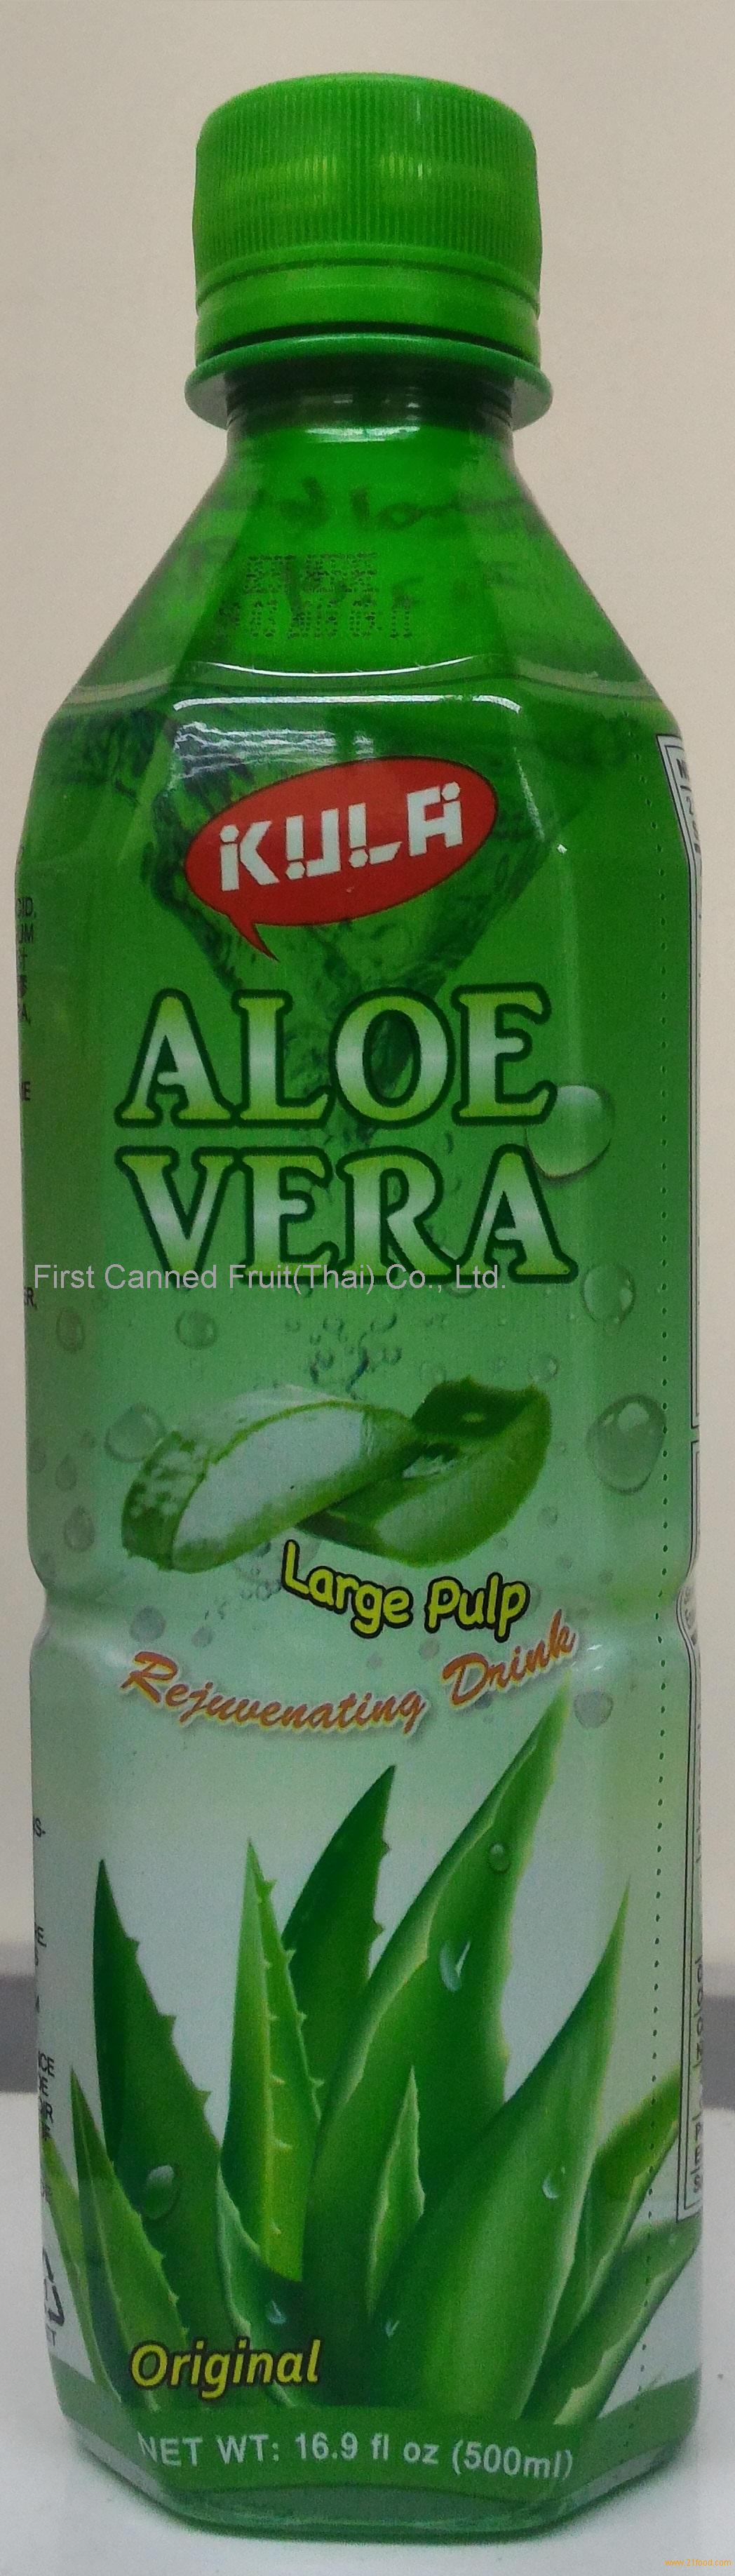 Aloe Vera Natural Juice with Pulp in PET Bottle products ...